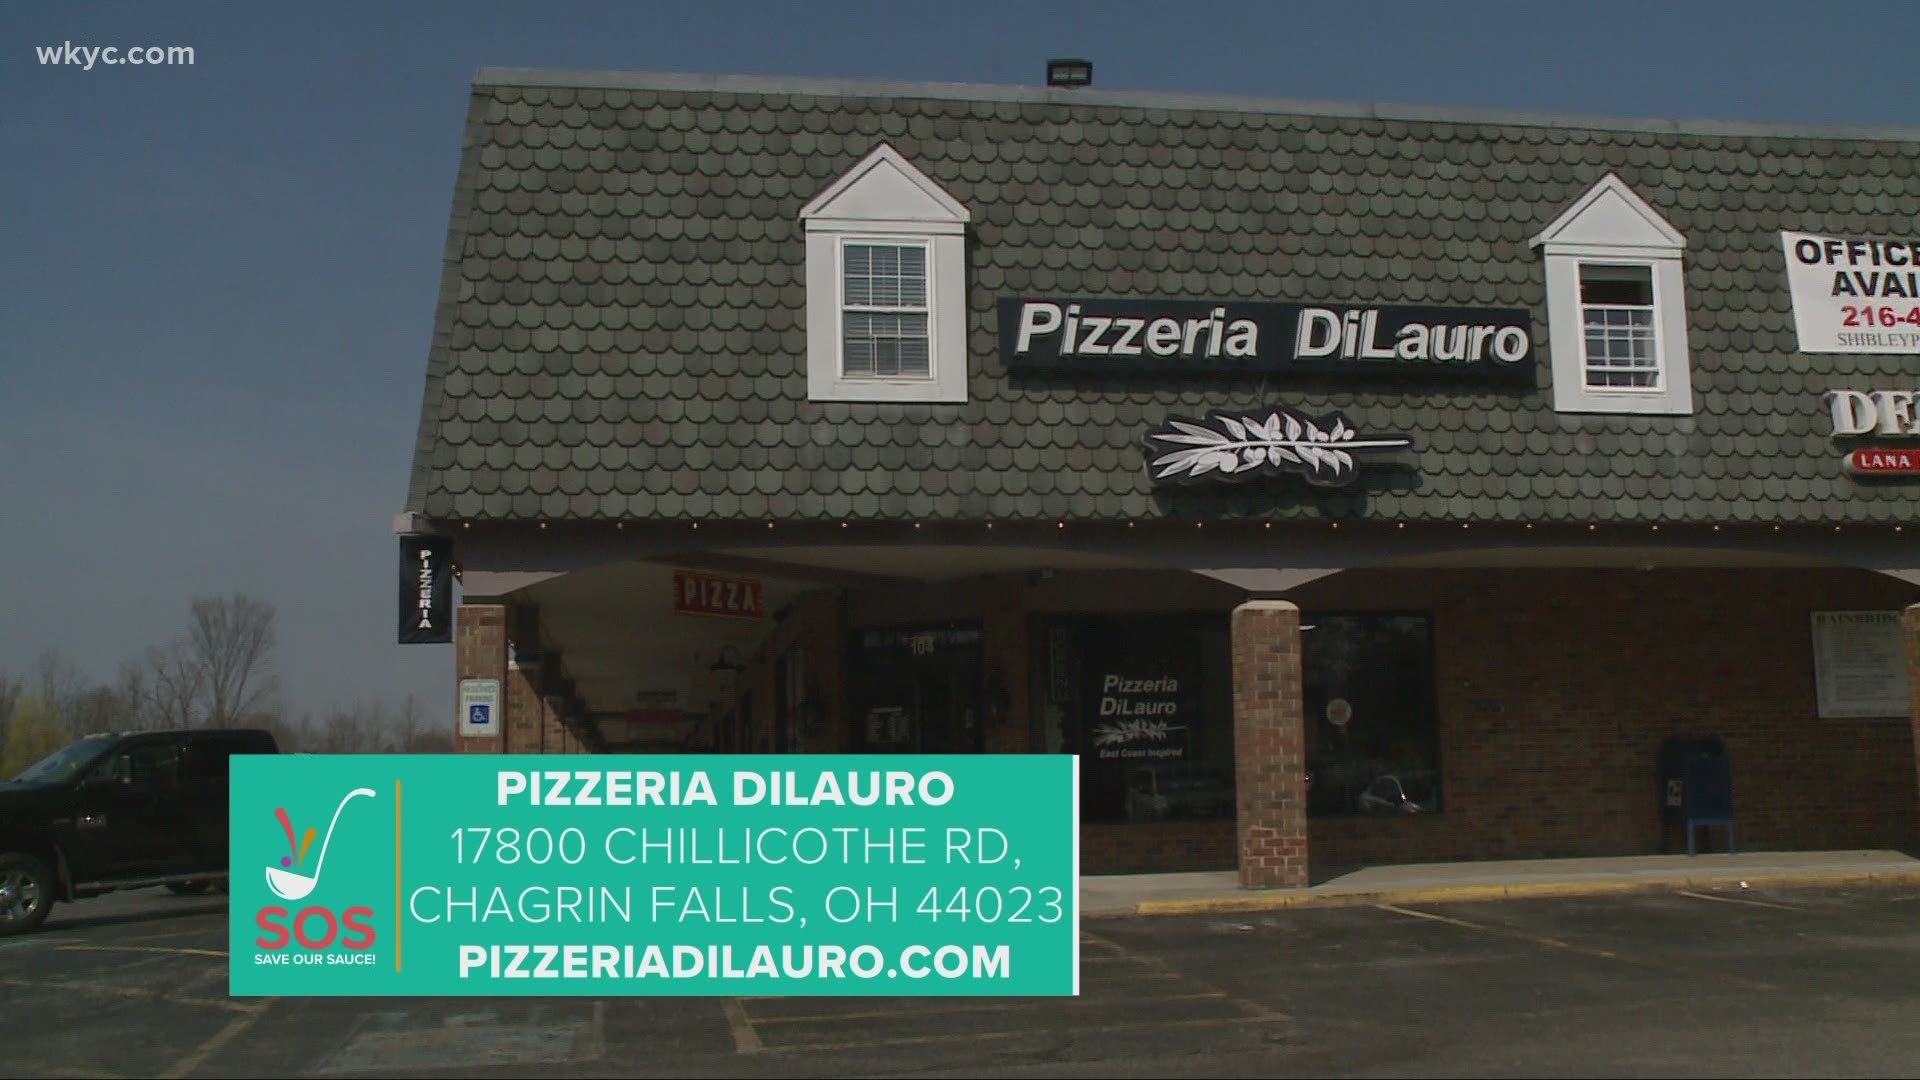 We're highlighting Pizzeria DiLauro in Chagrin Falls as we continue the 'Save Our Sauce' campaign in support of Northeast Ohio restaurants amid the COVID pandemic.